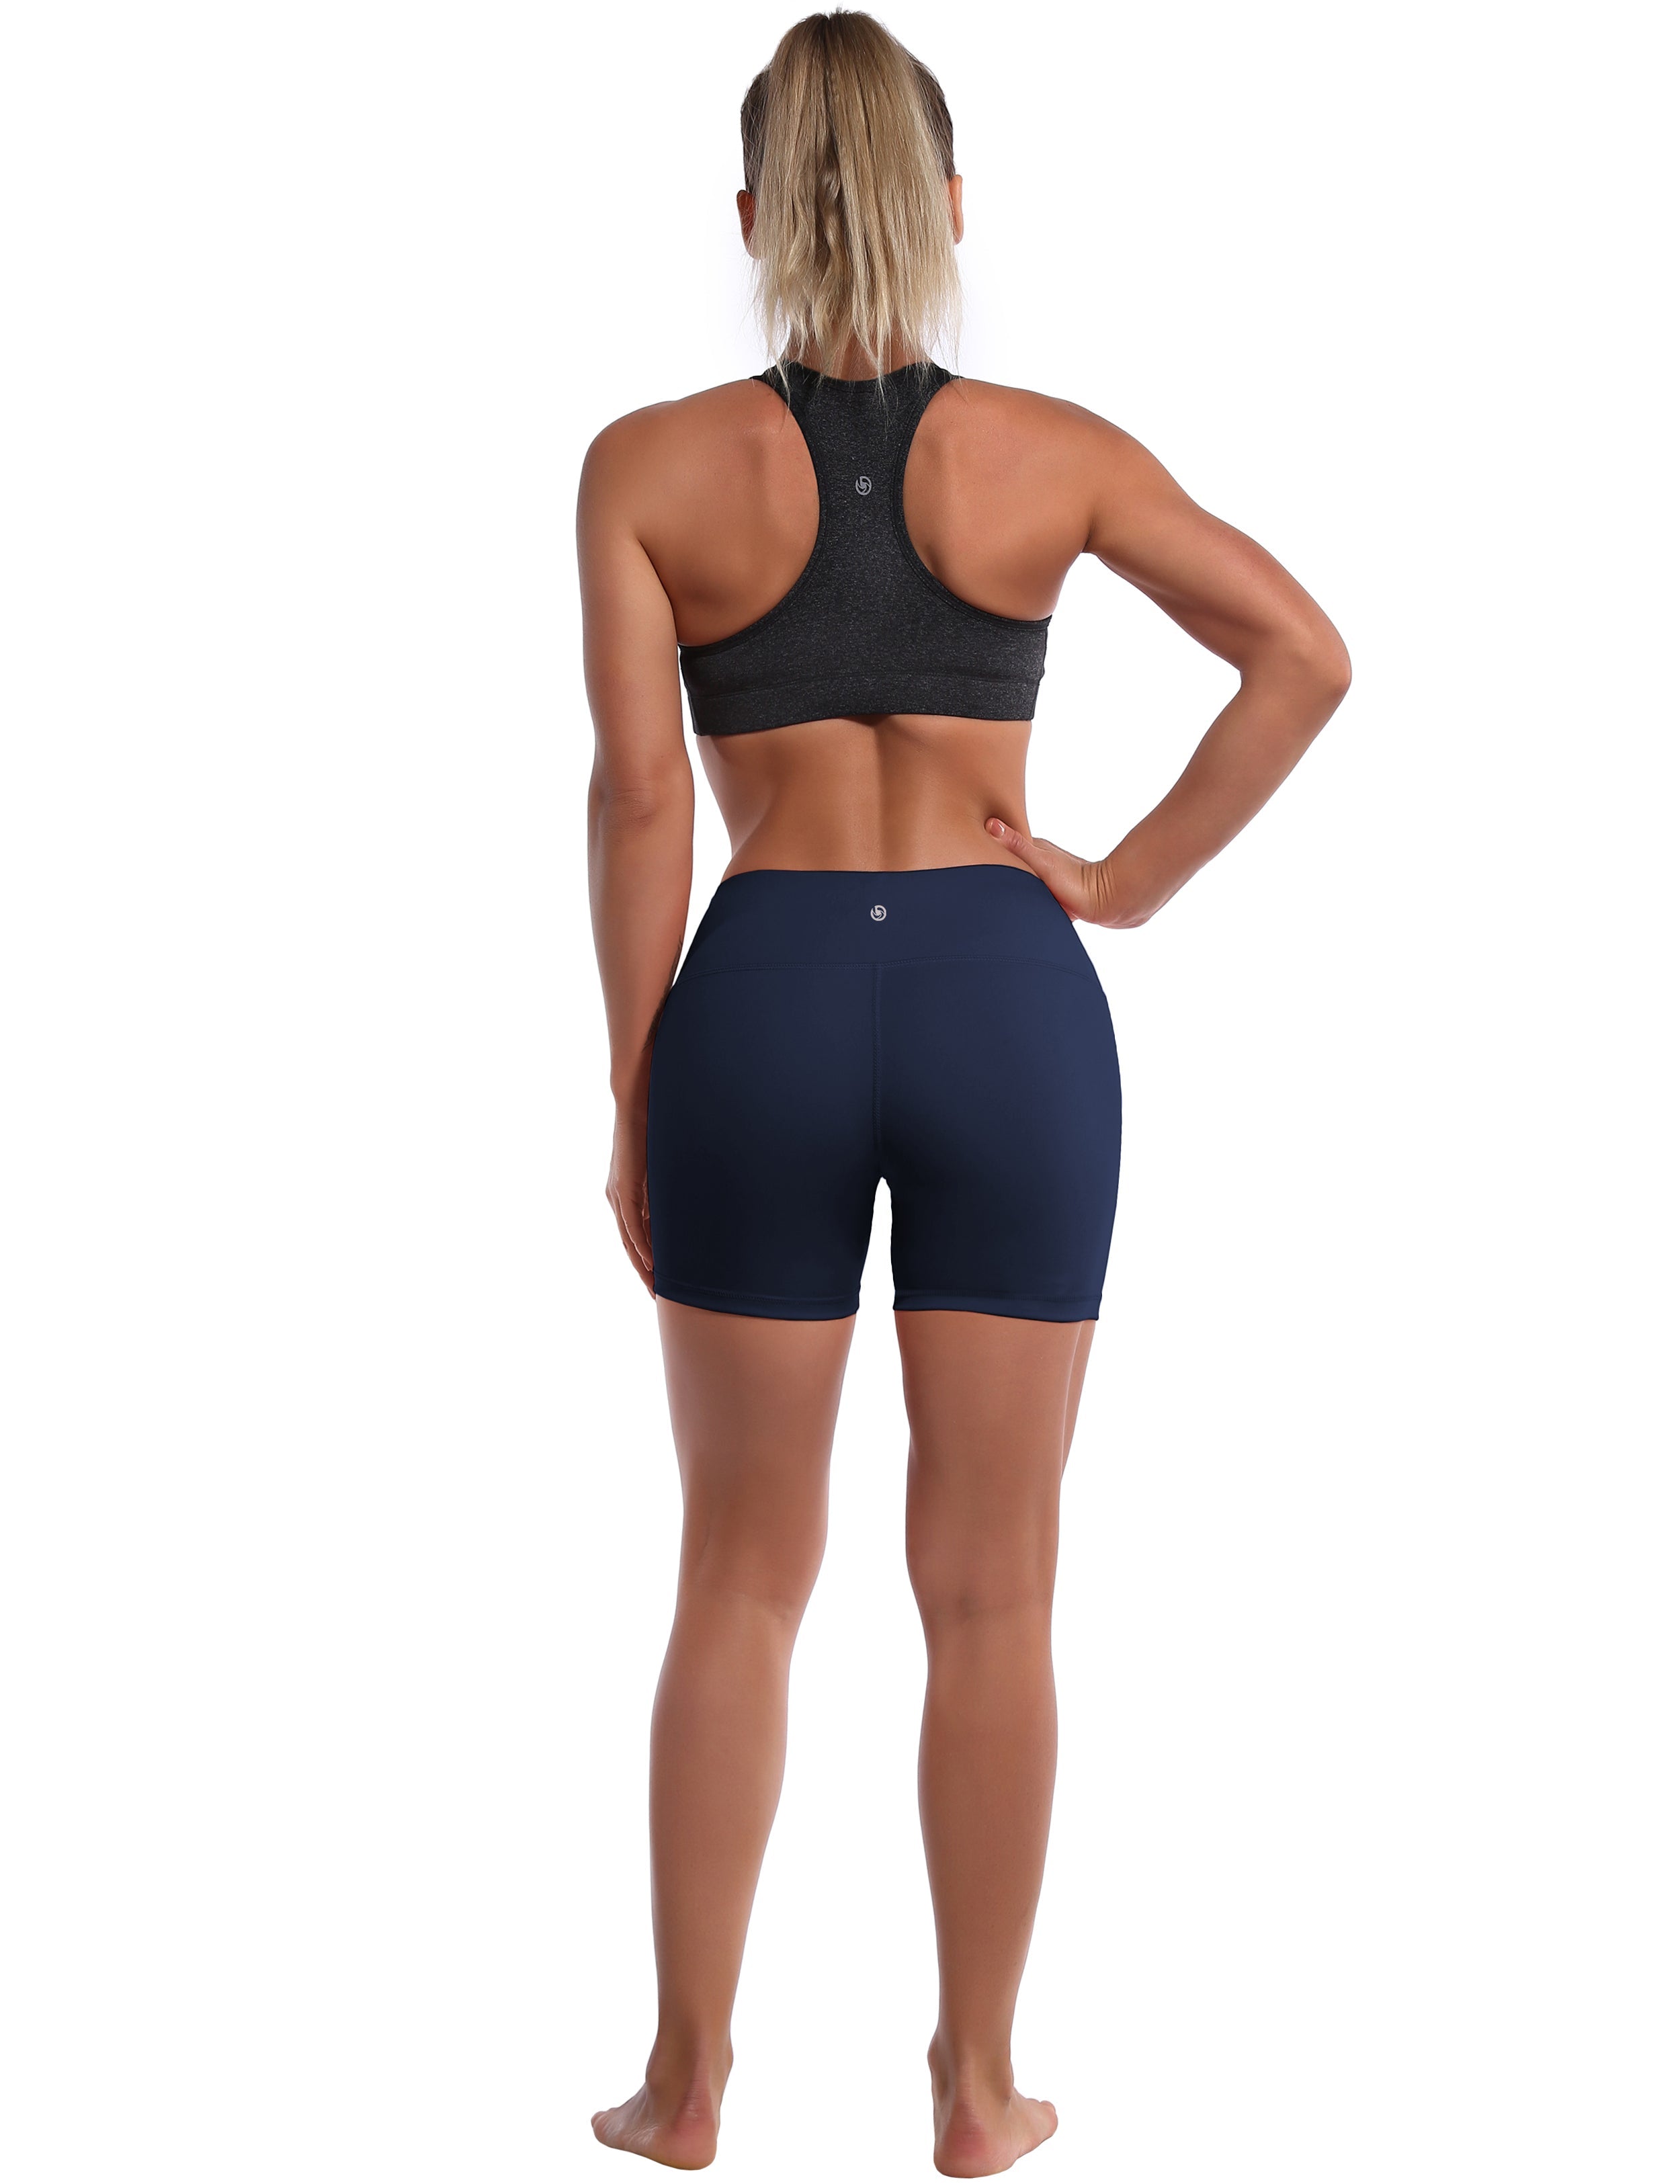 4" Yoga Shorts darknavy Sleek, soft, smooth and totally comfortable: our newest style is here. Softest-ever fabric High elasticity High density 4-way stretch Fabric doesn't attract lint easily No see-through Moisture-wicking Machine wash 75% Nylon, 25% Spandex